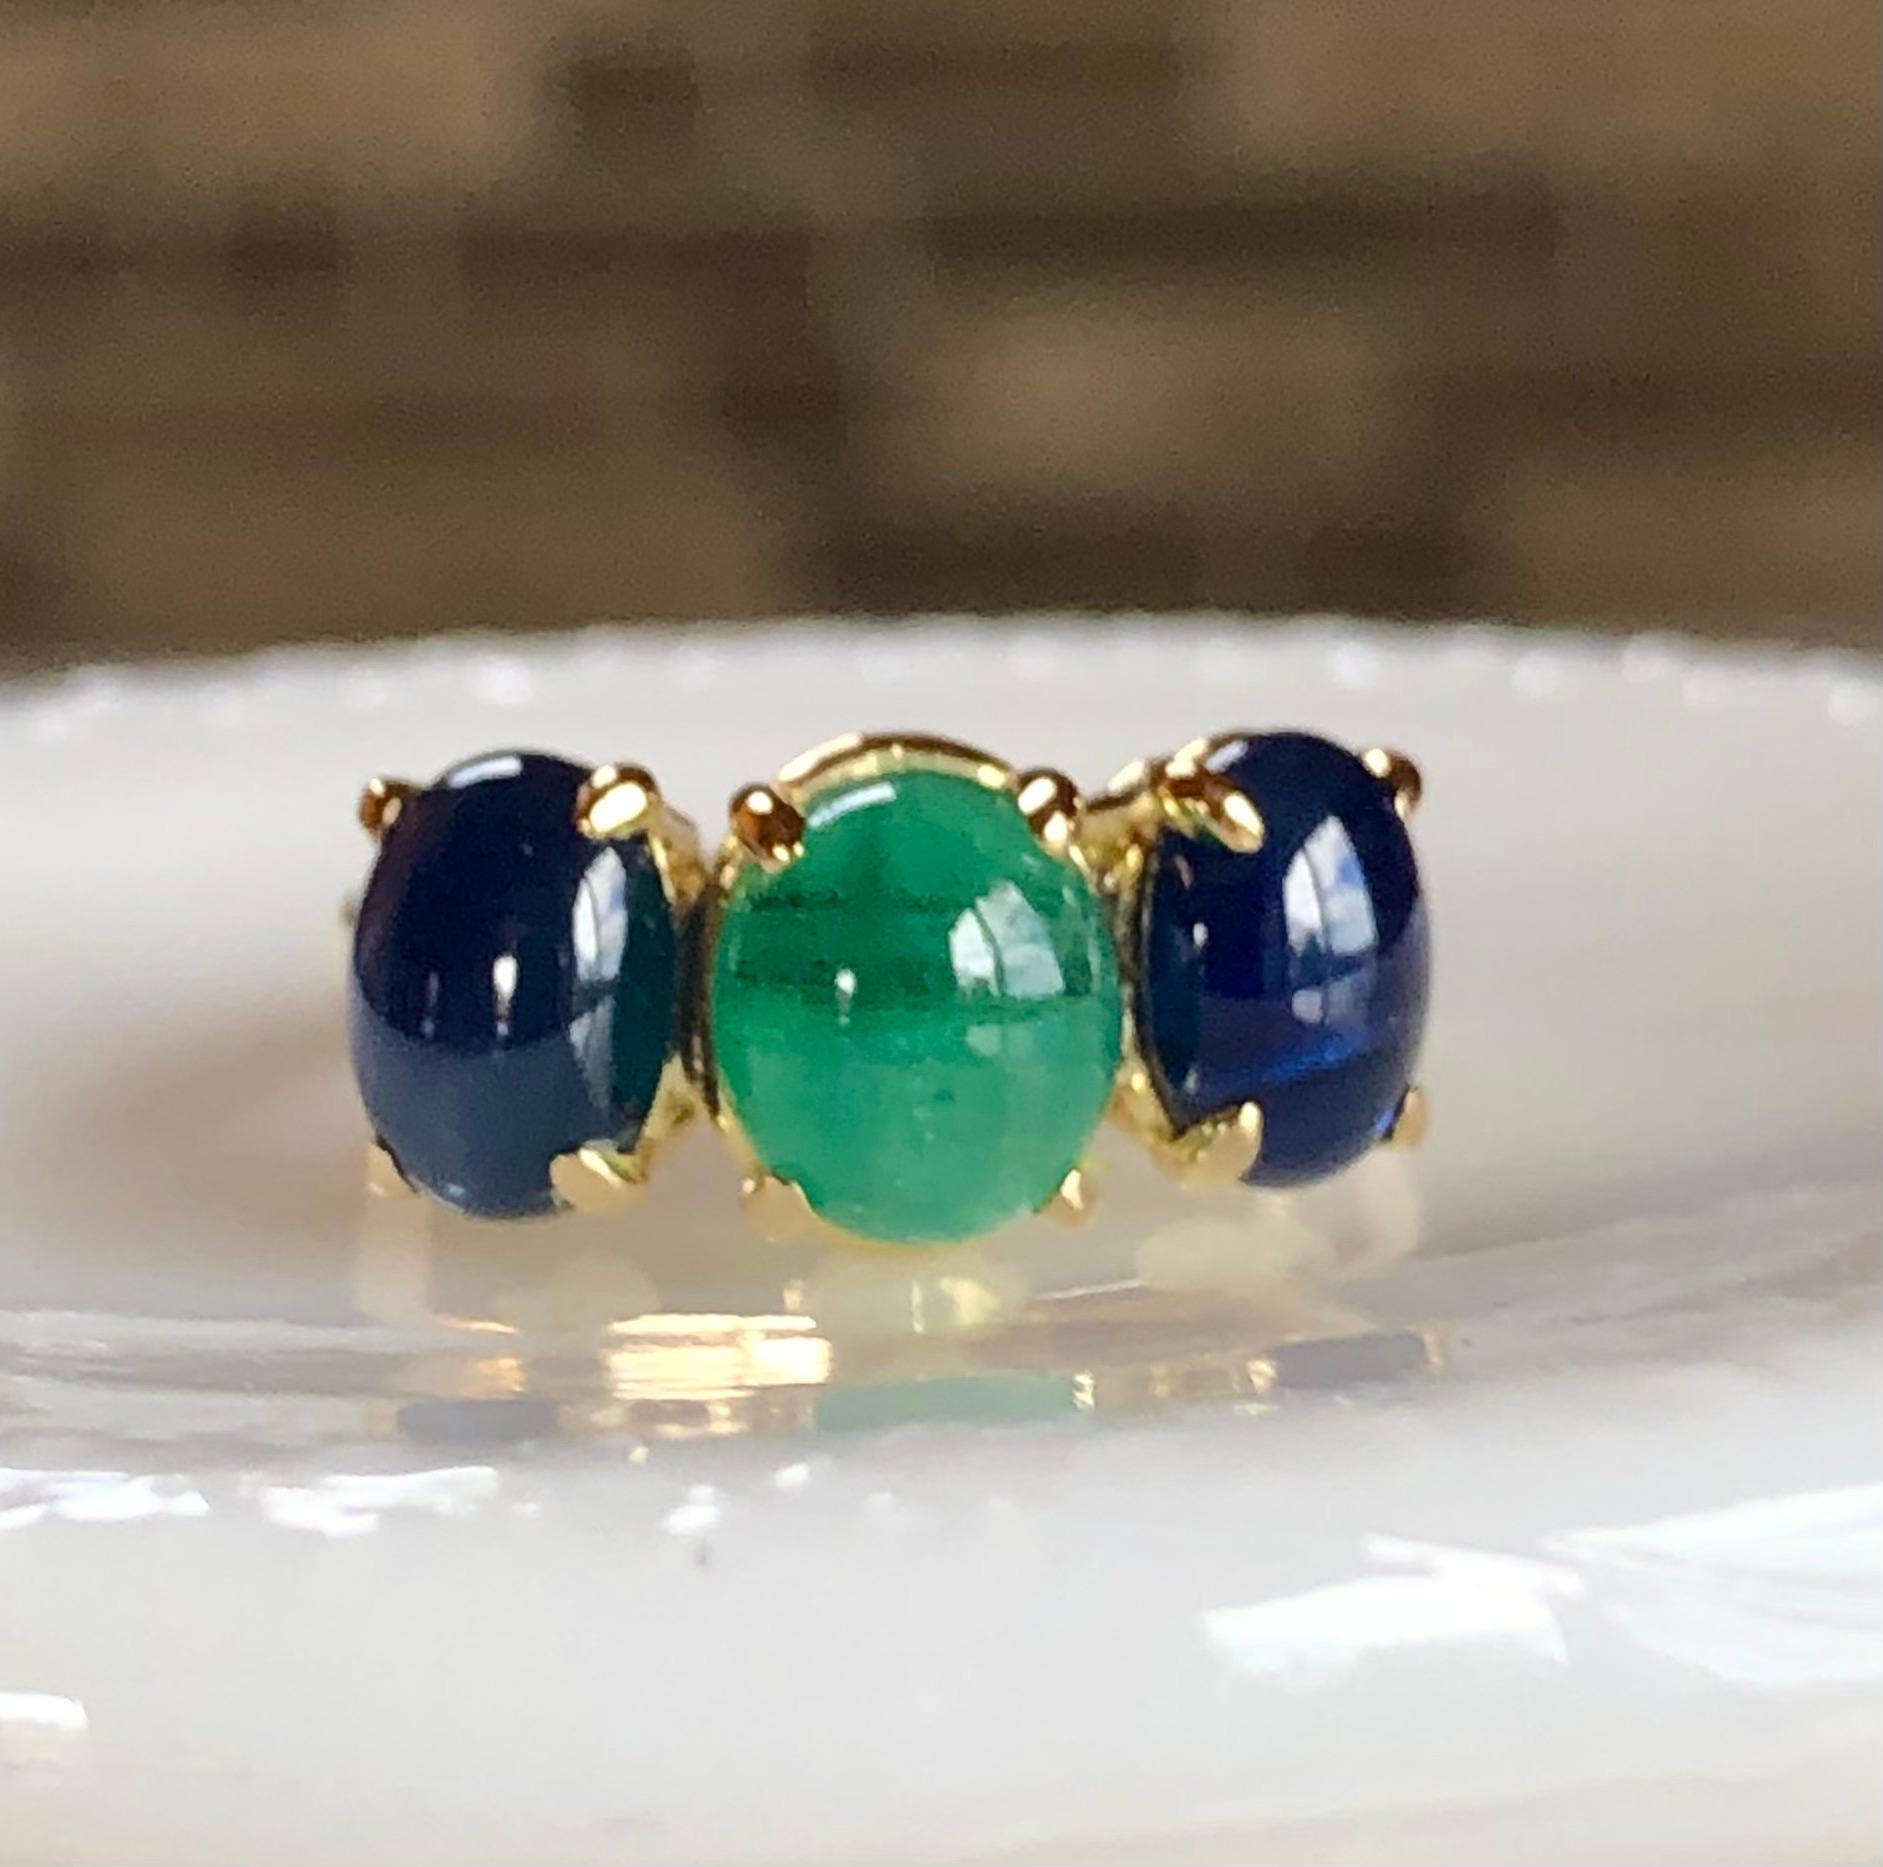 A bright colorful ring mount in the center, with one oval cabochon cut Colombian emerald of 1.90 carats.
Flanked at the sides, with a pair of oval cabochon cuts of Royal blue Sapphires, with a combined weight of 3.46 carats.
Total Gemstone weight